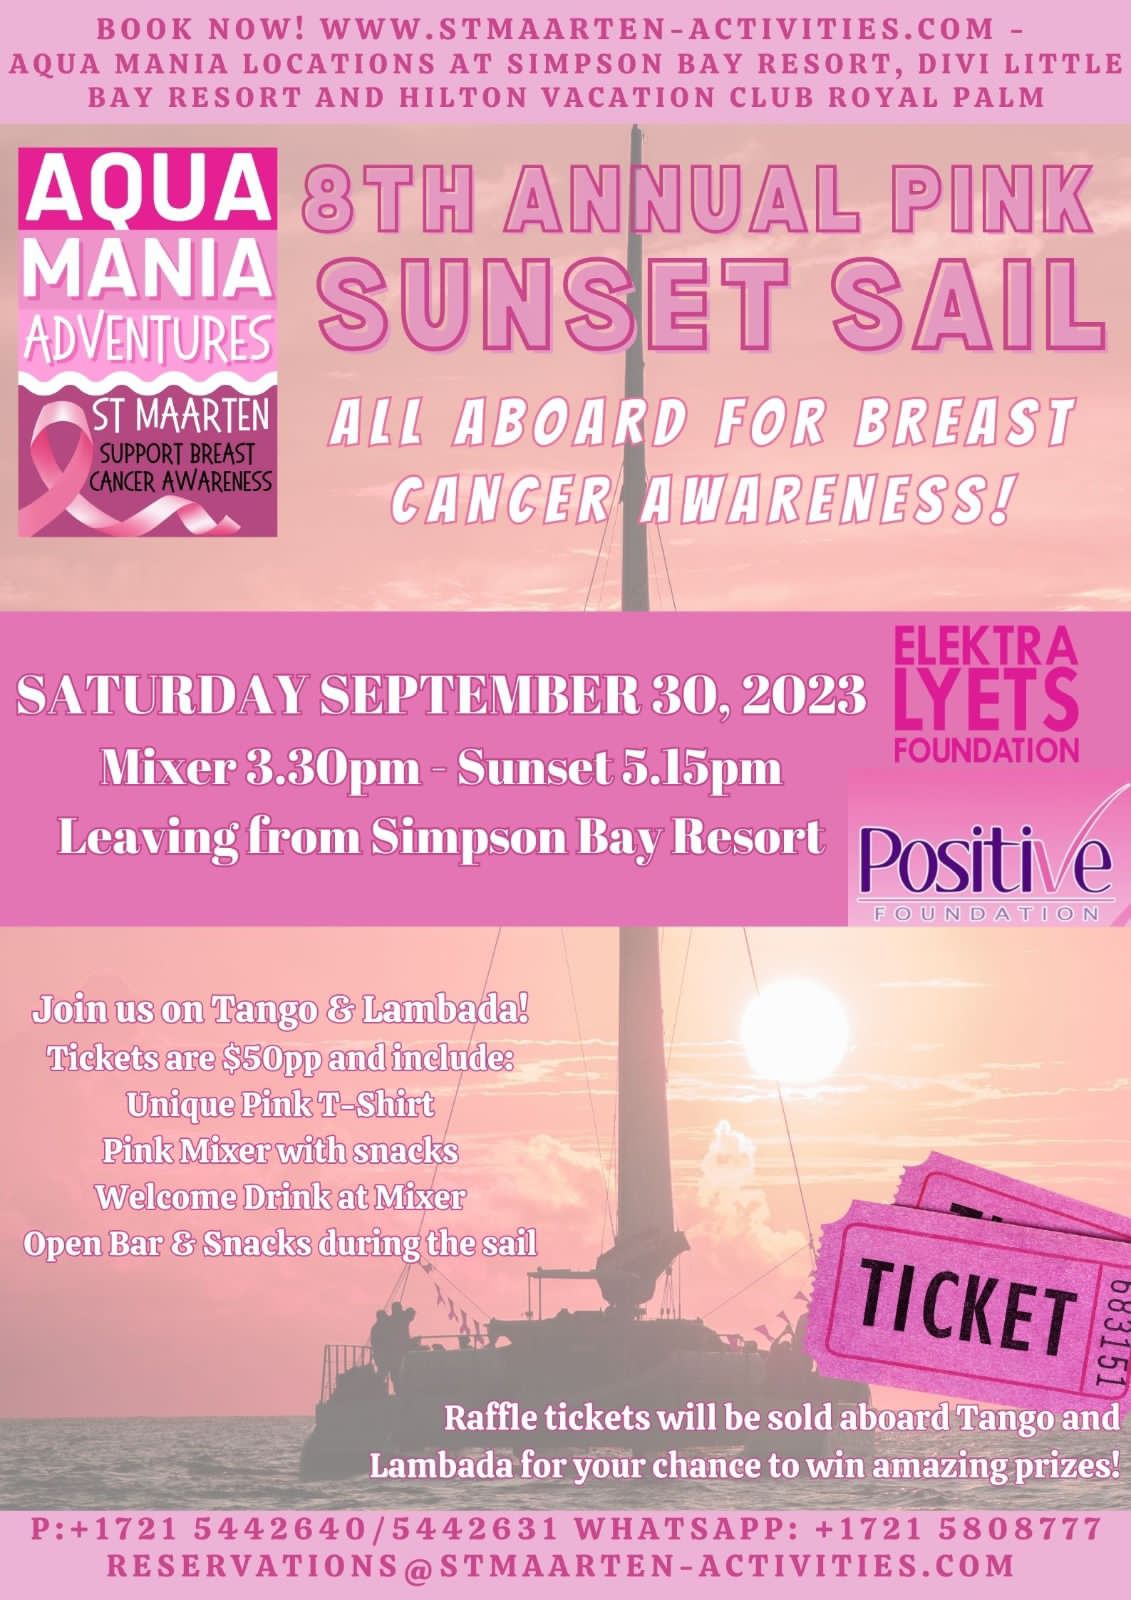 Flyer for the 8th annual sunset sail for breast cancer awareness, Aqua Mania Adventures, Simpson Bay Resort, St Maarten, St Martyn, Maho